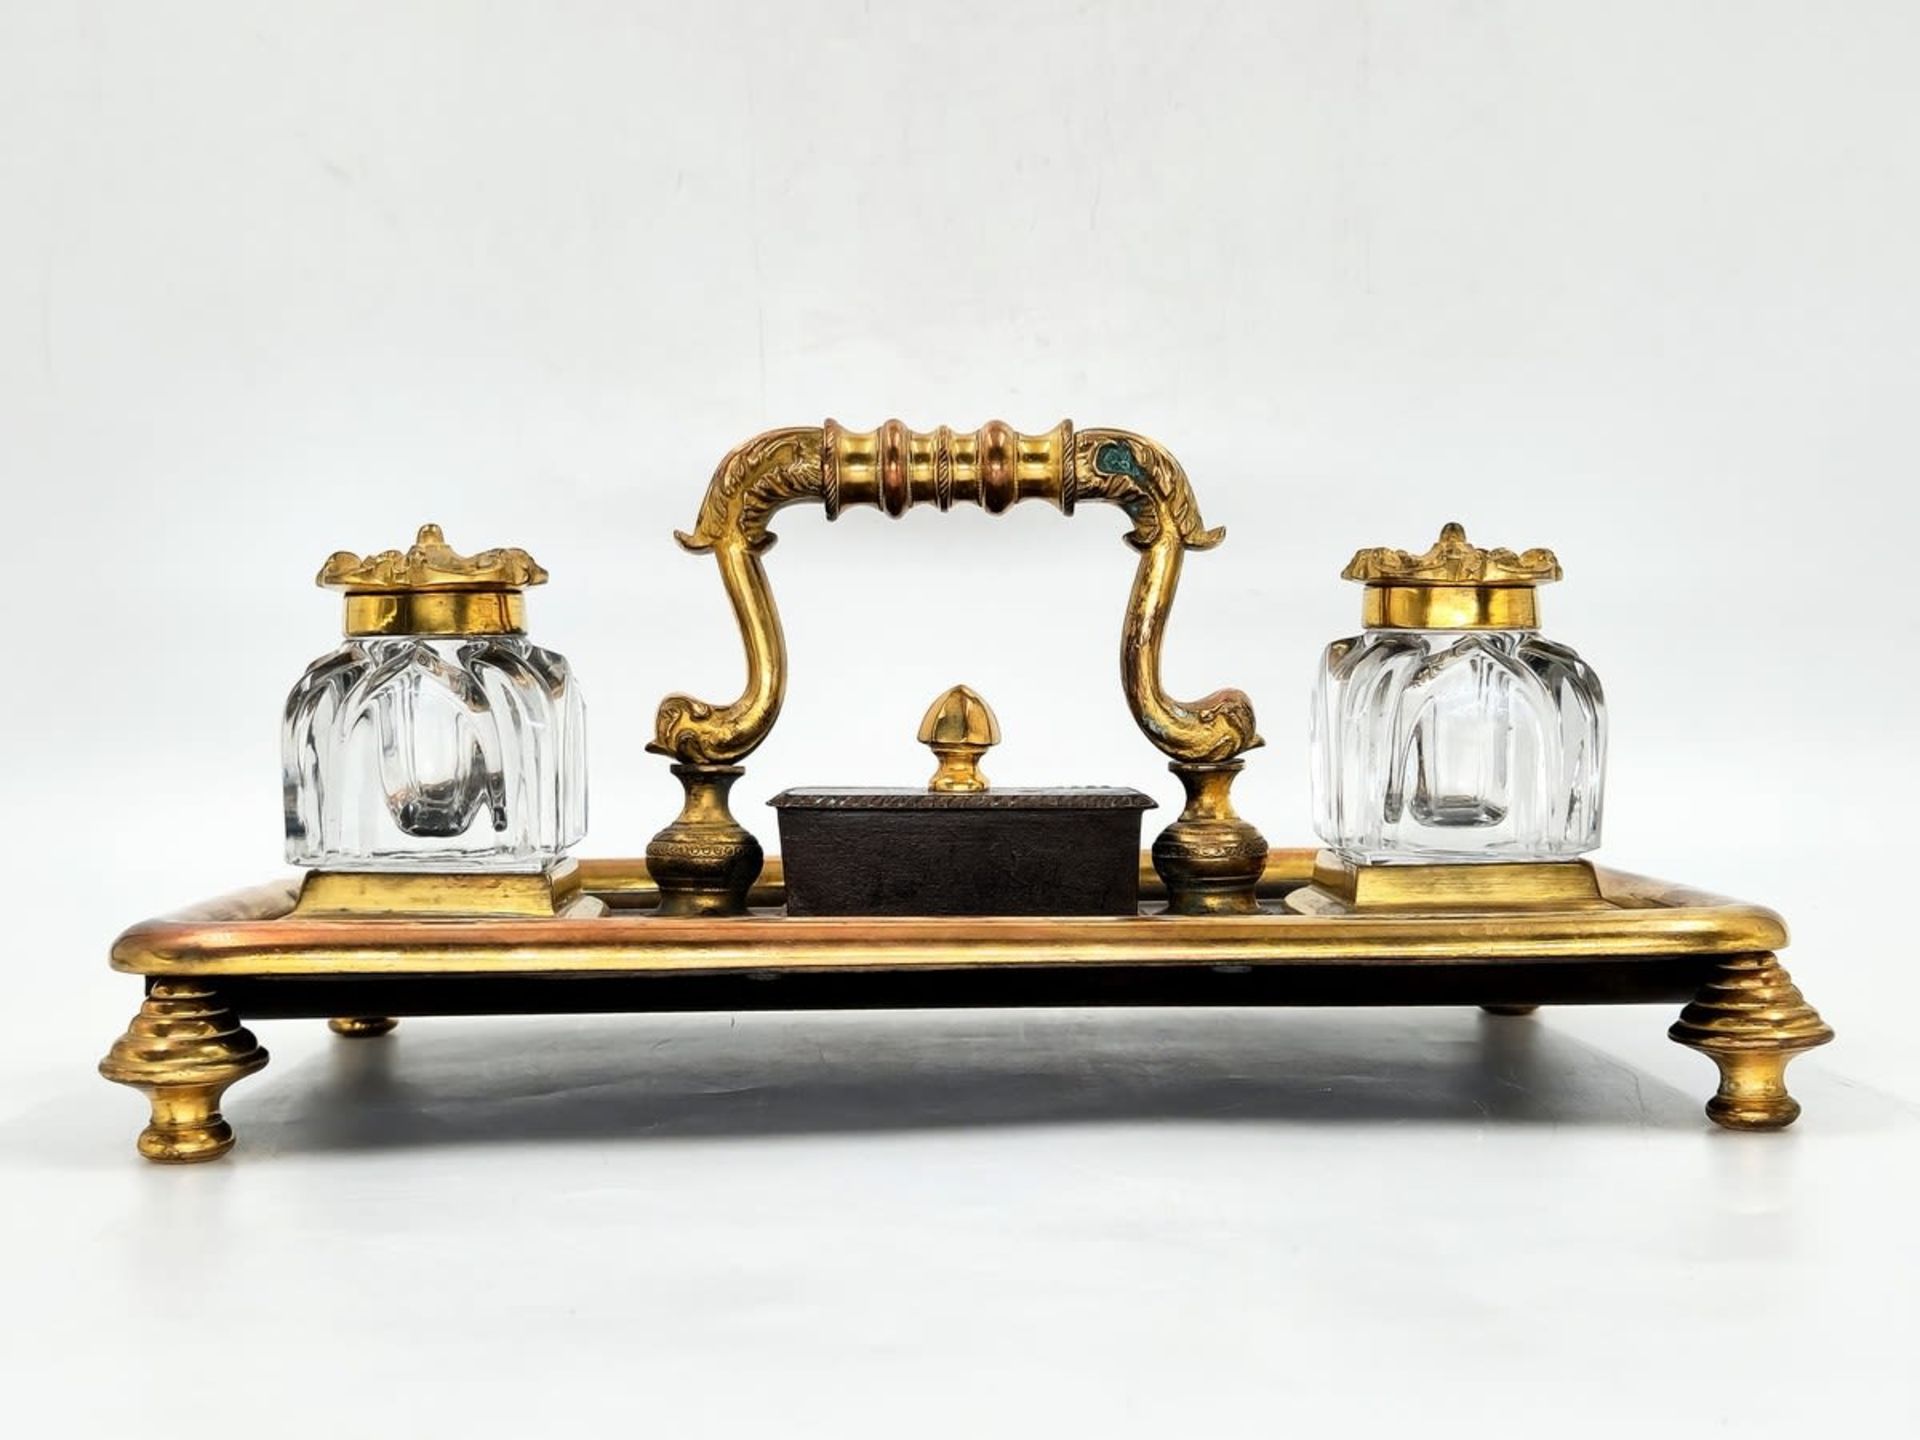 An antique double tabletop inkwell, brass and spelter, the ink wells themselves are made of glass,